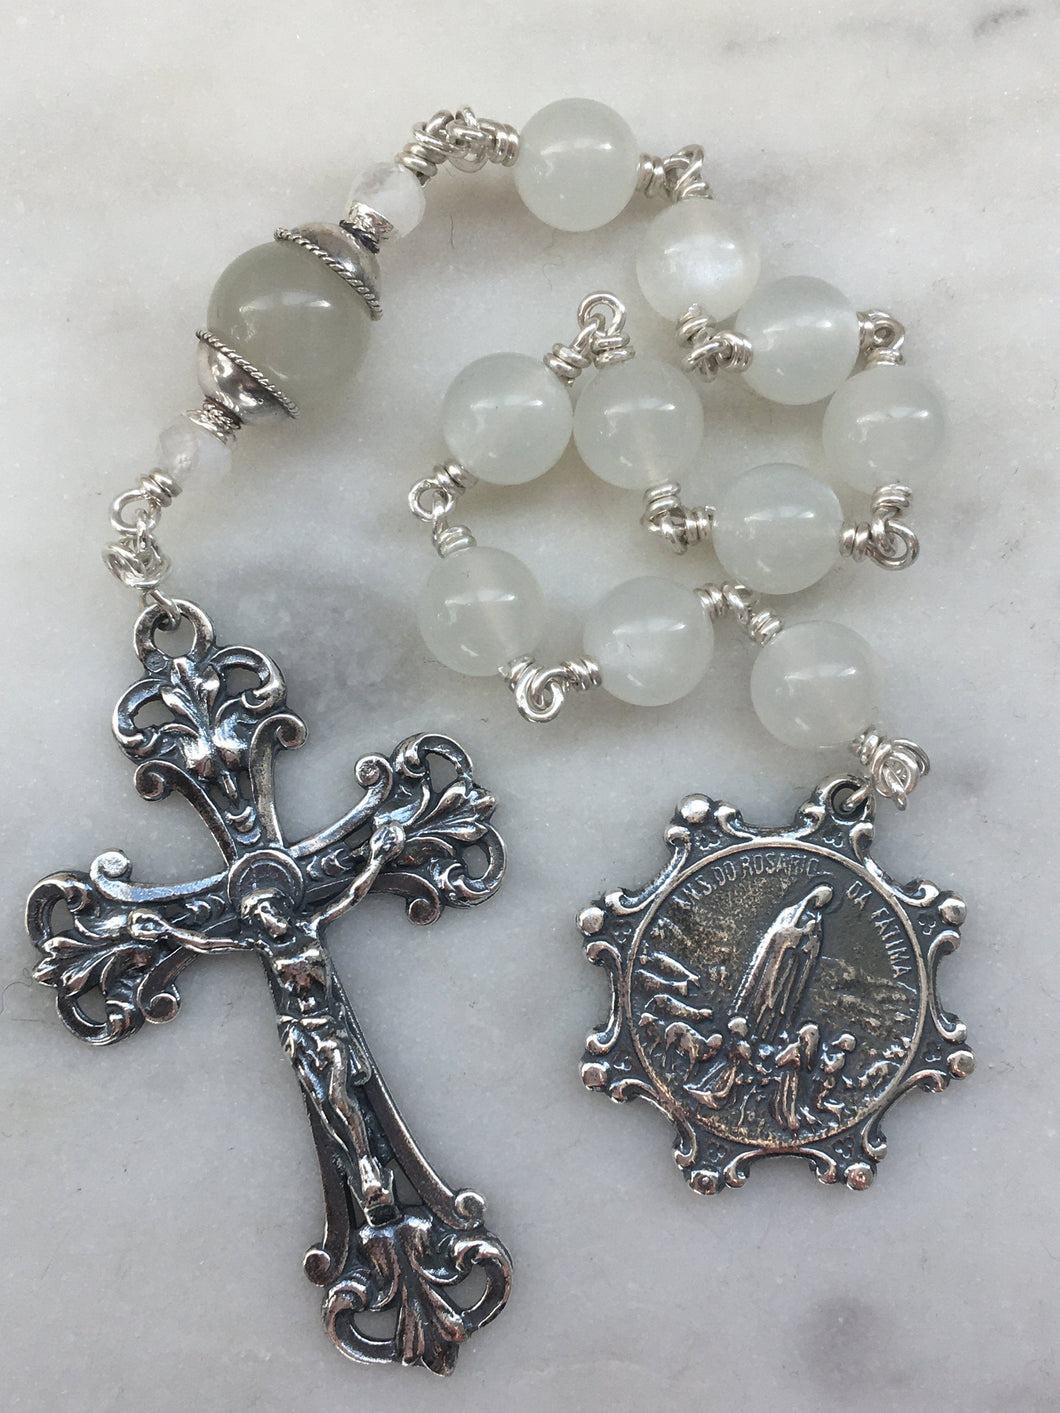 Our Lady of Fatima Tenner - Moonstone Gemstone Rosary - Argentium and Sterling Silver - Single Decade Rosary